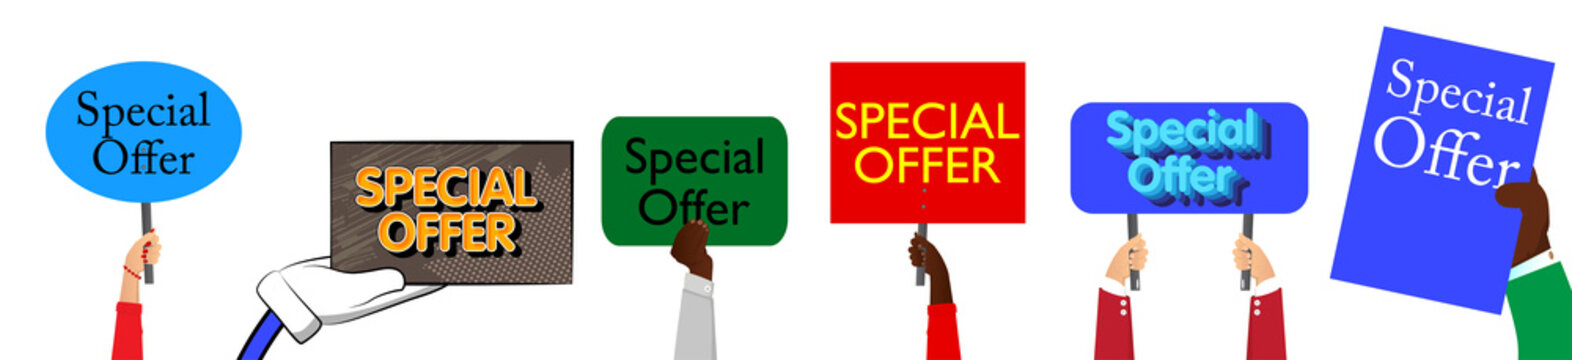 Hand holding up a banner with Special Offer text. Showing billboard banner, sign. Sale, shopping, shop retail business concept.